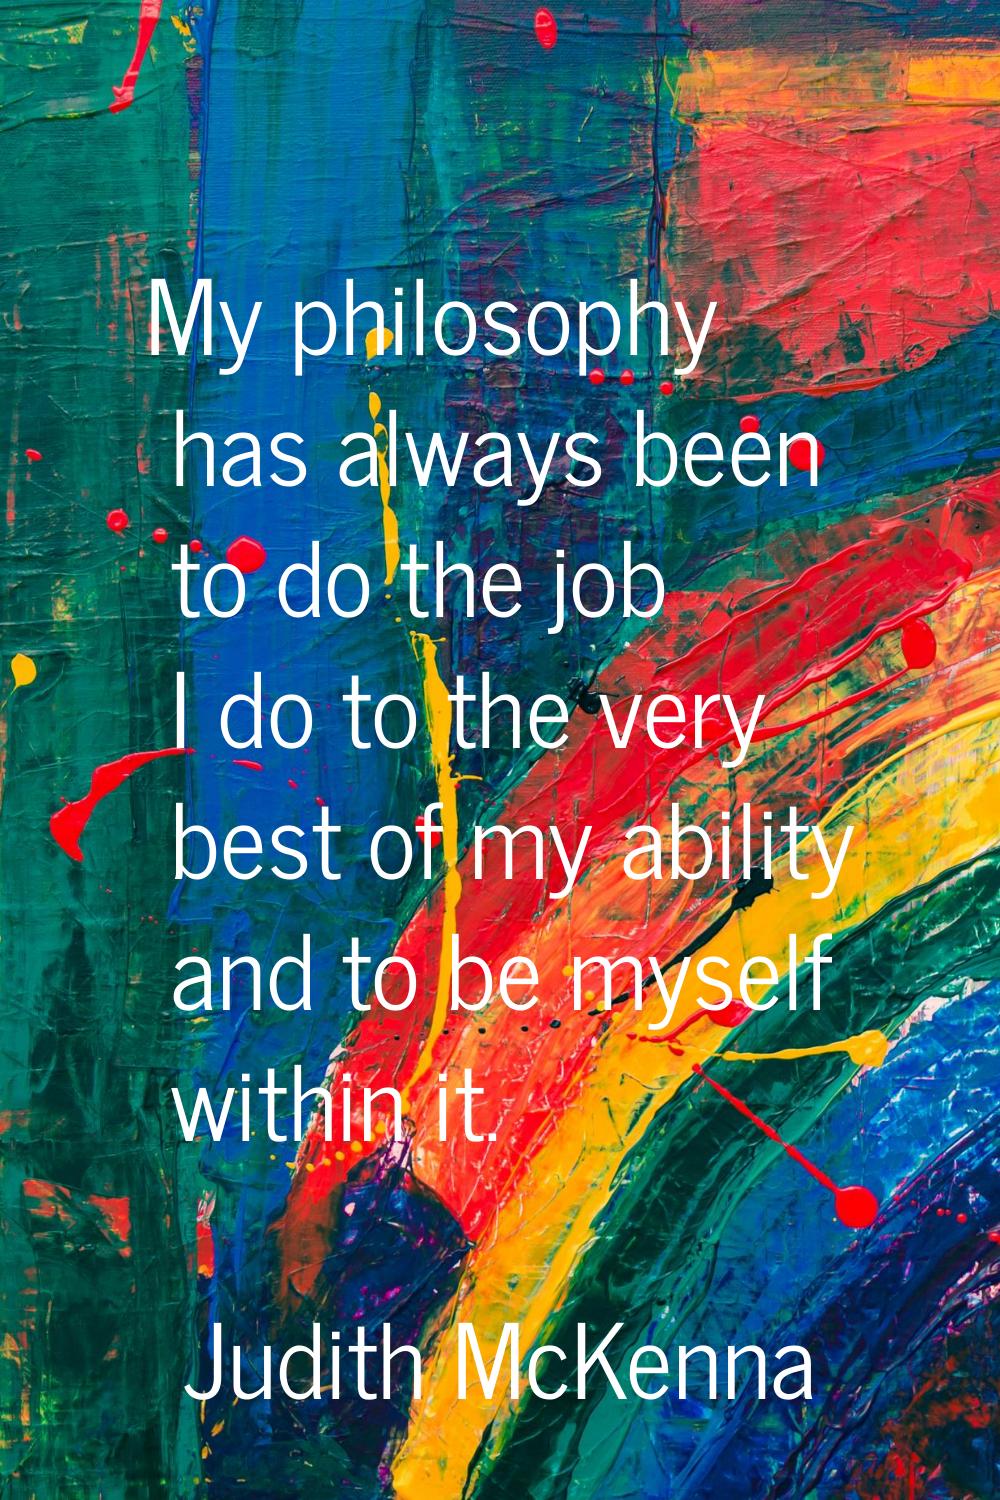 My philosophy has always been to do the job I do to the very best of my ability and to be myself wi